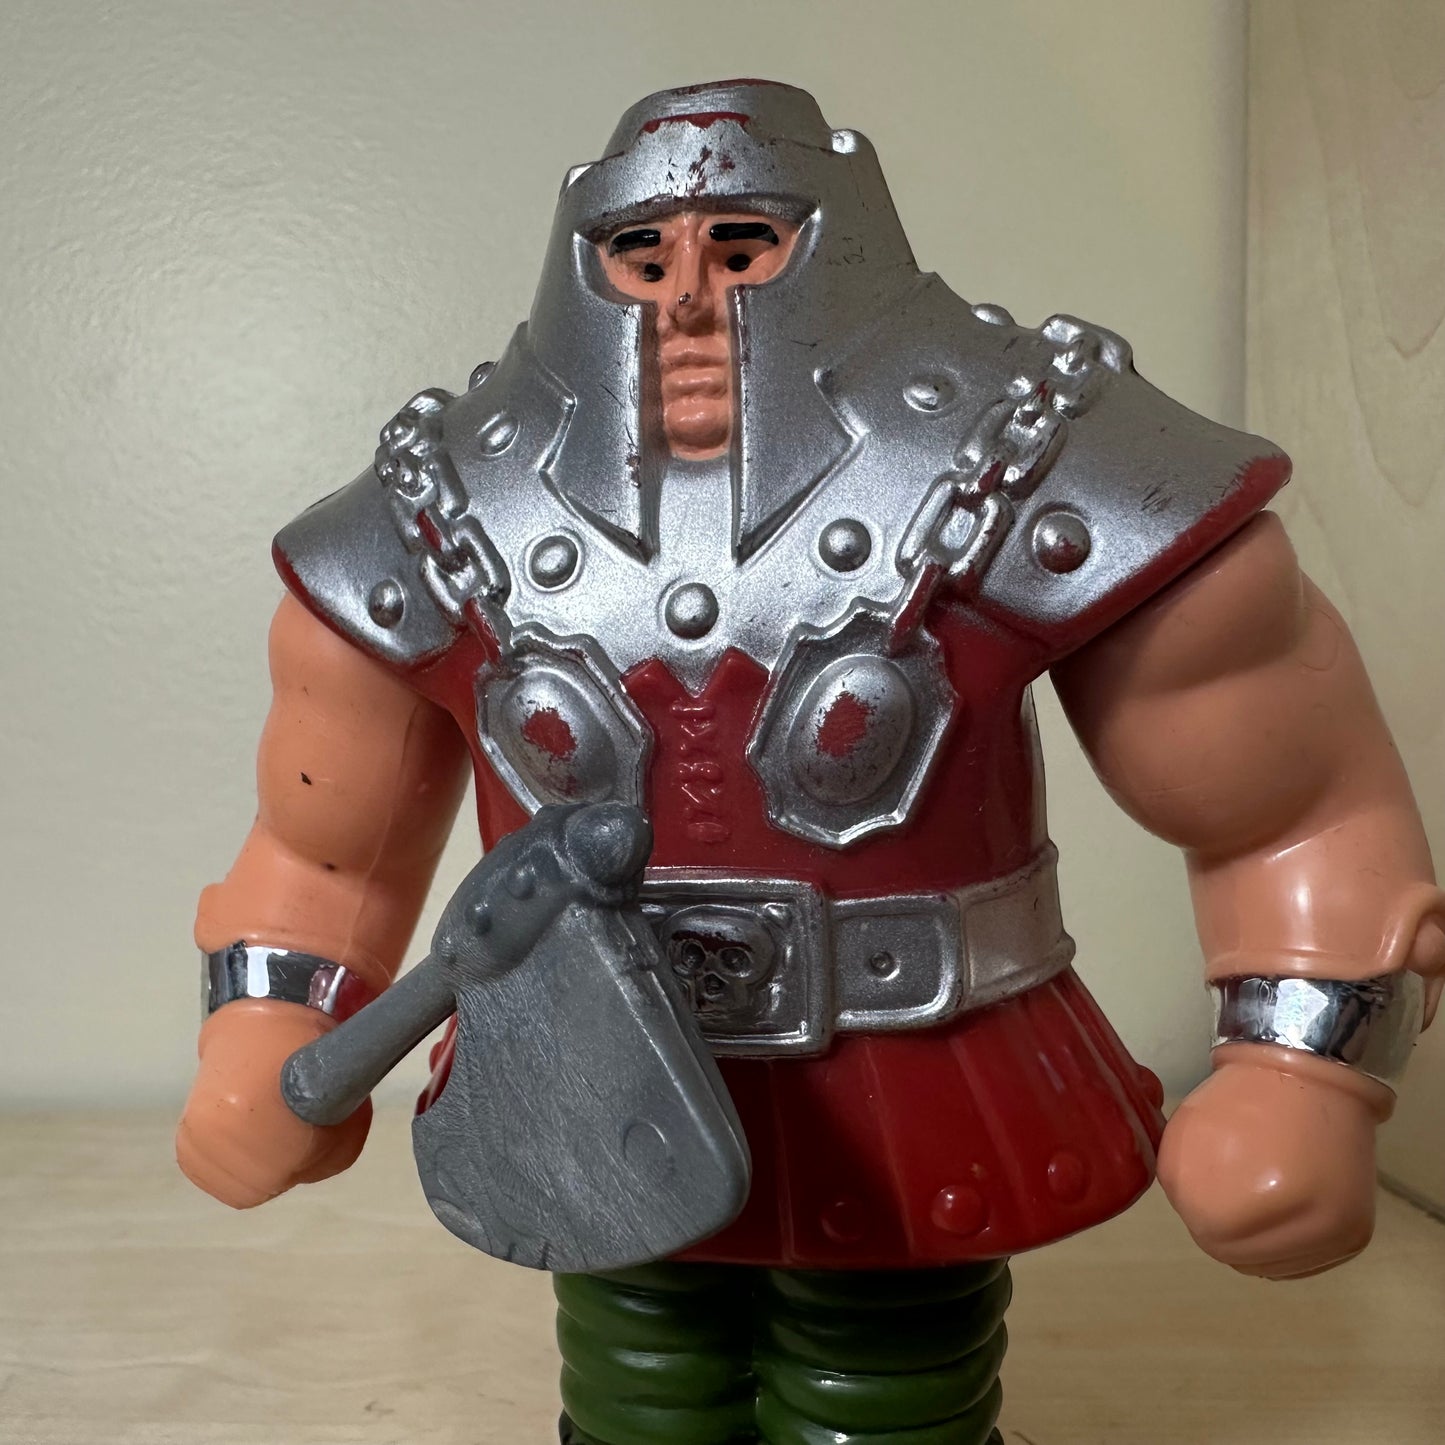 1982 MOTU Ram Man Master’s of the Universe Complete Action Figure Toy